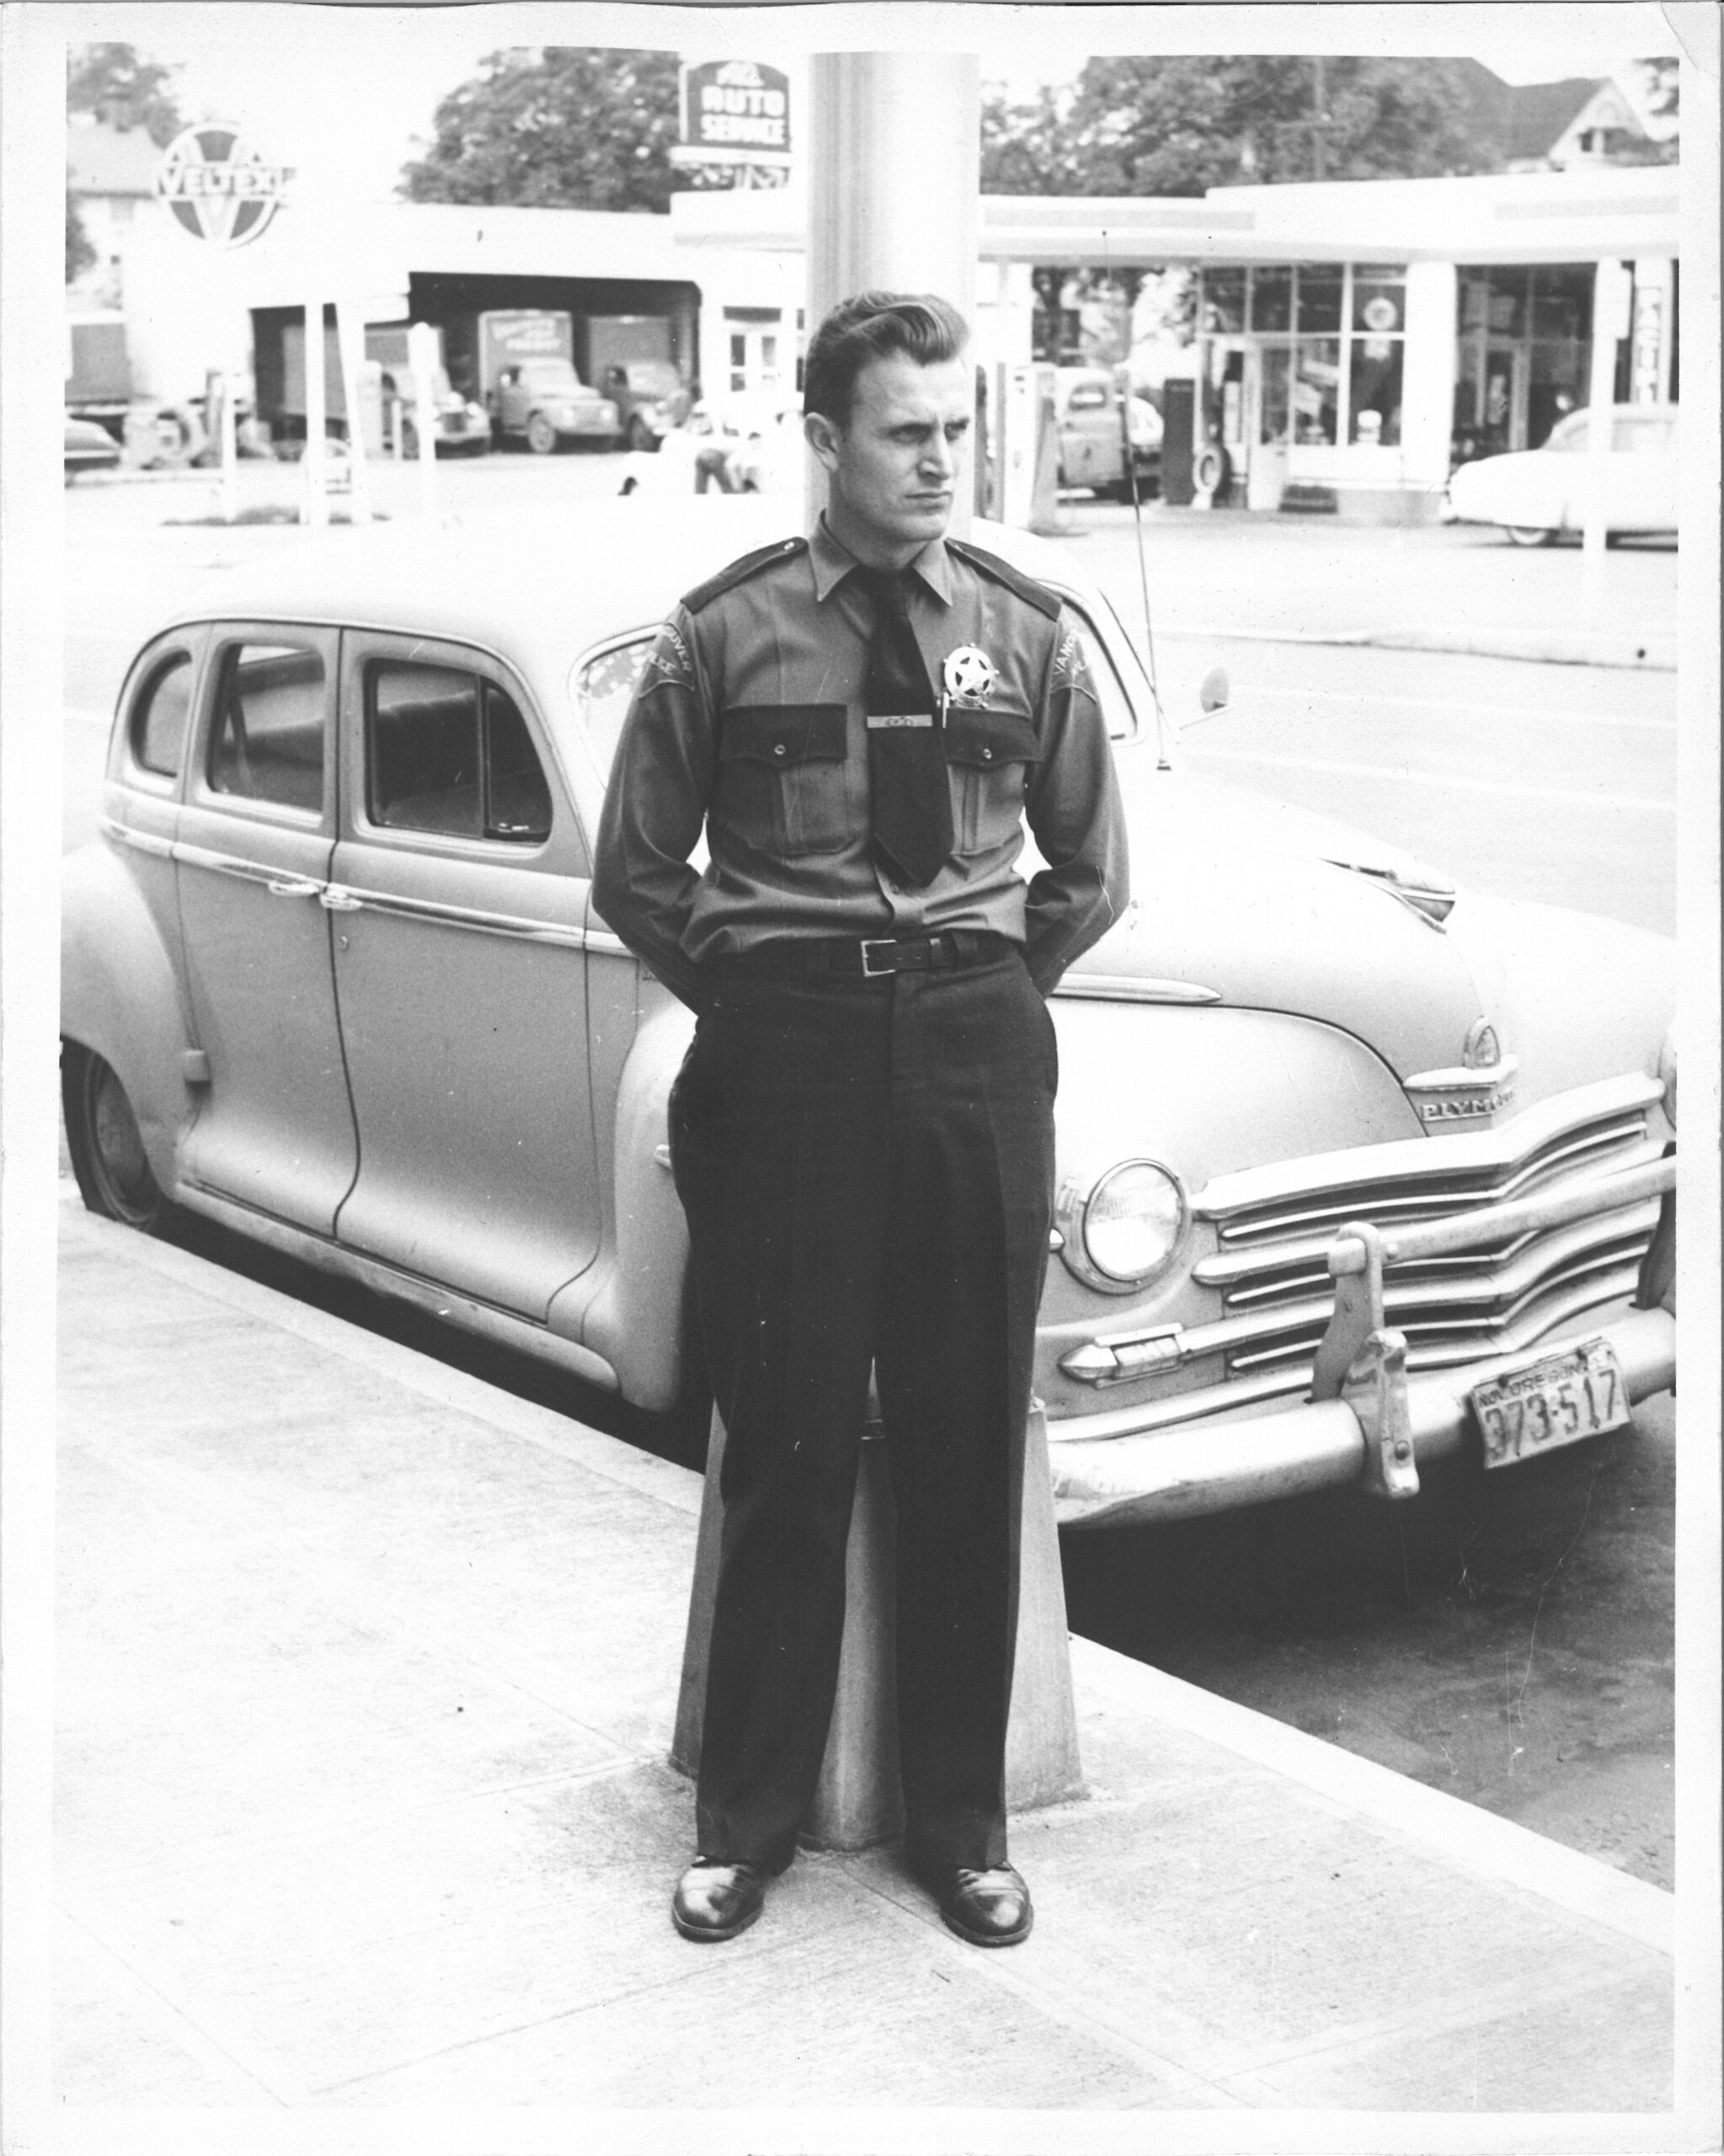 old black and white image of officer